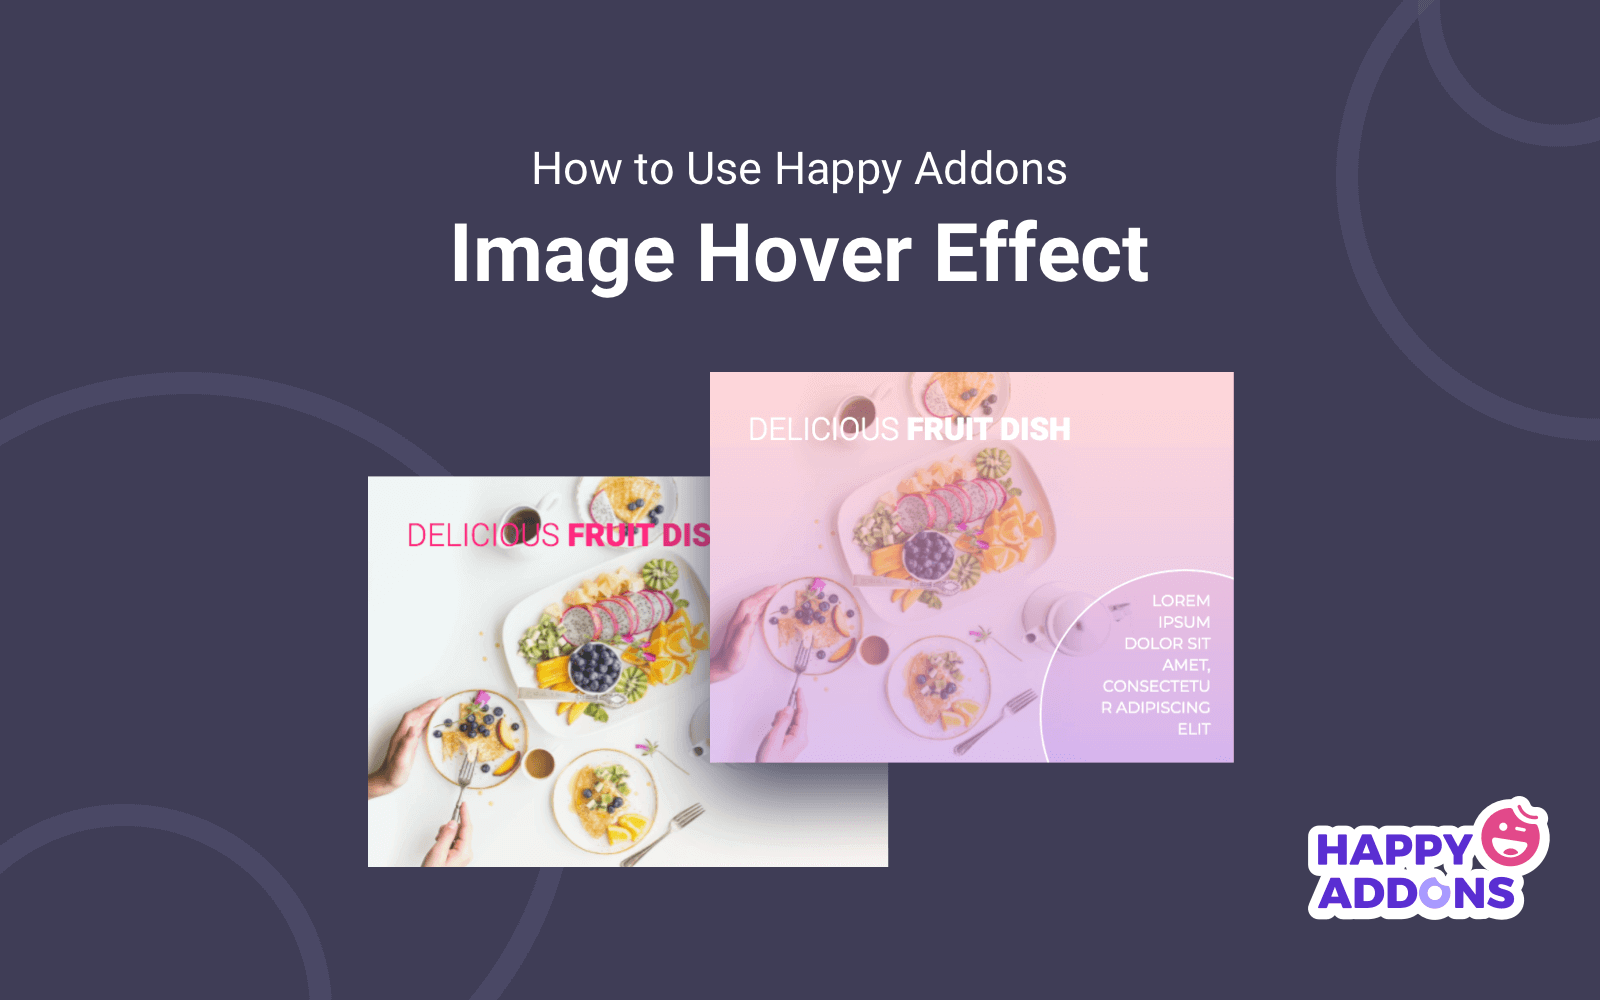 How to Use Happy Addons Image Hover Effects